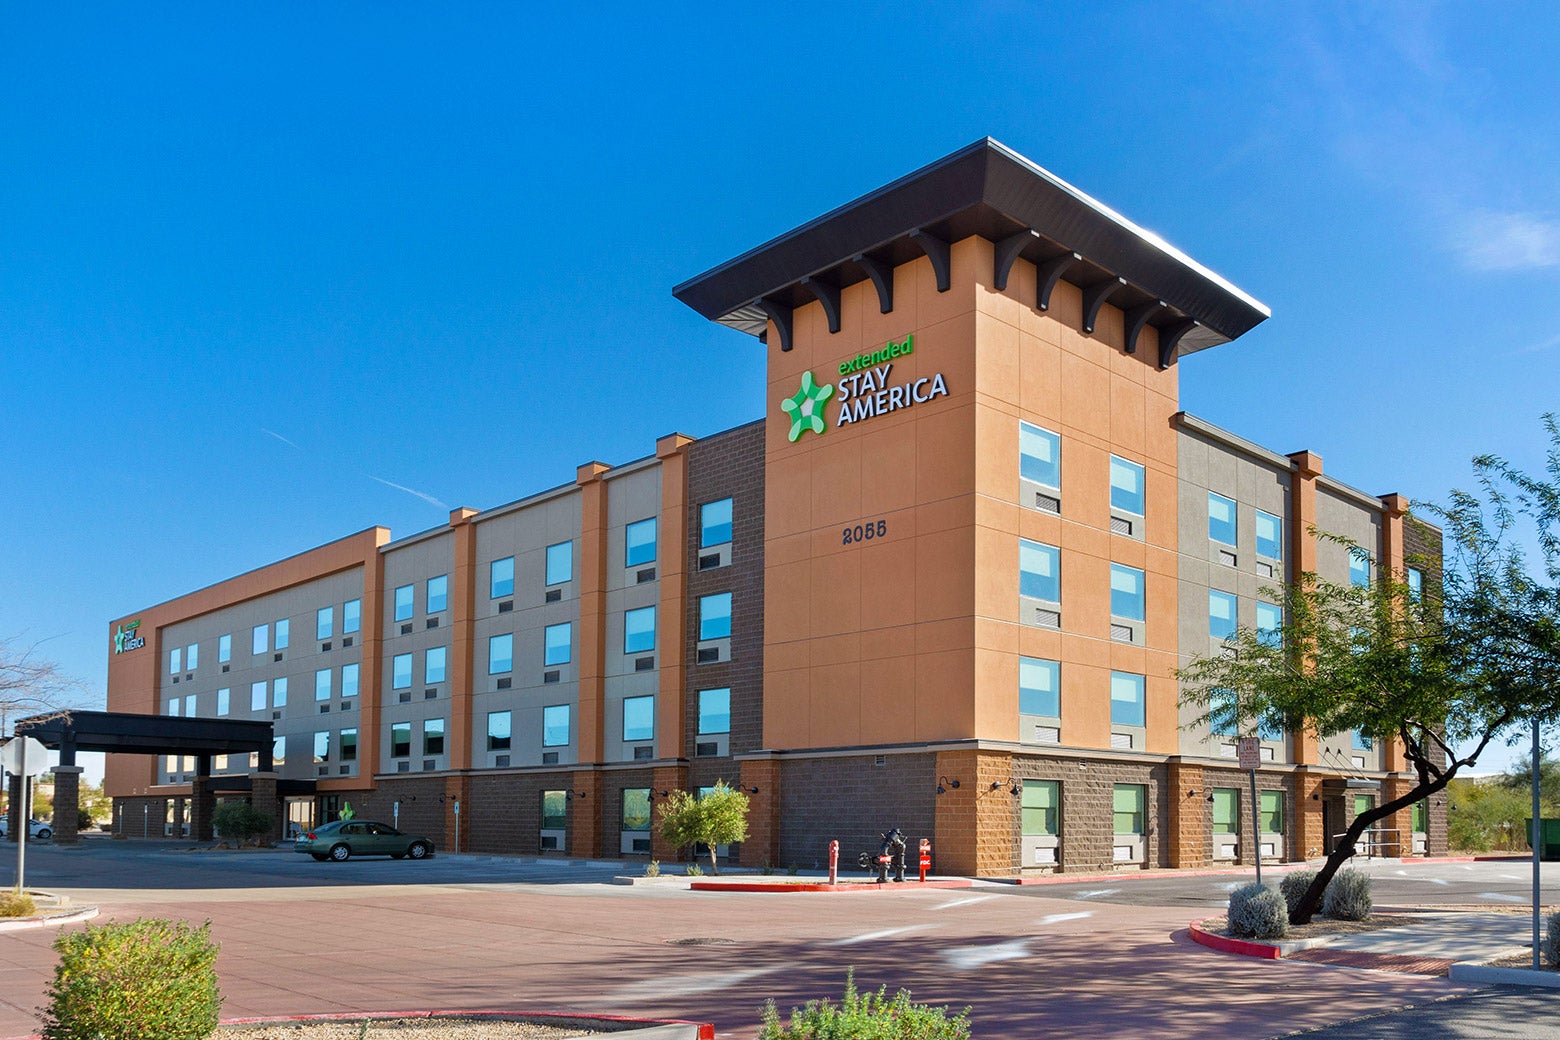 An exterior view of an extended-stay hotel, with a parking lot.